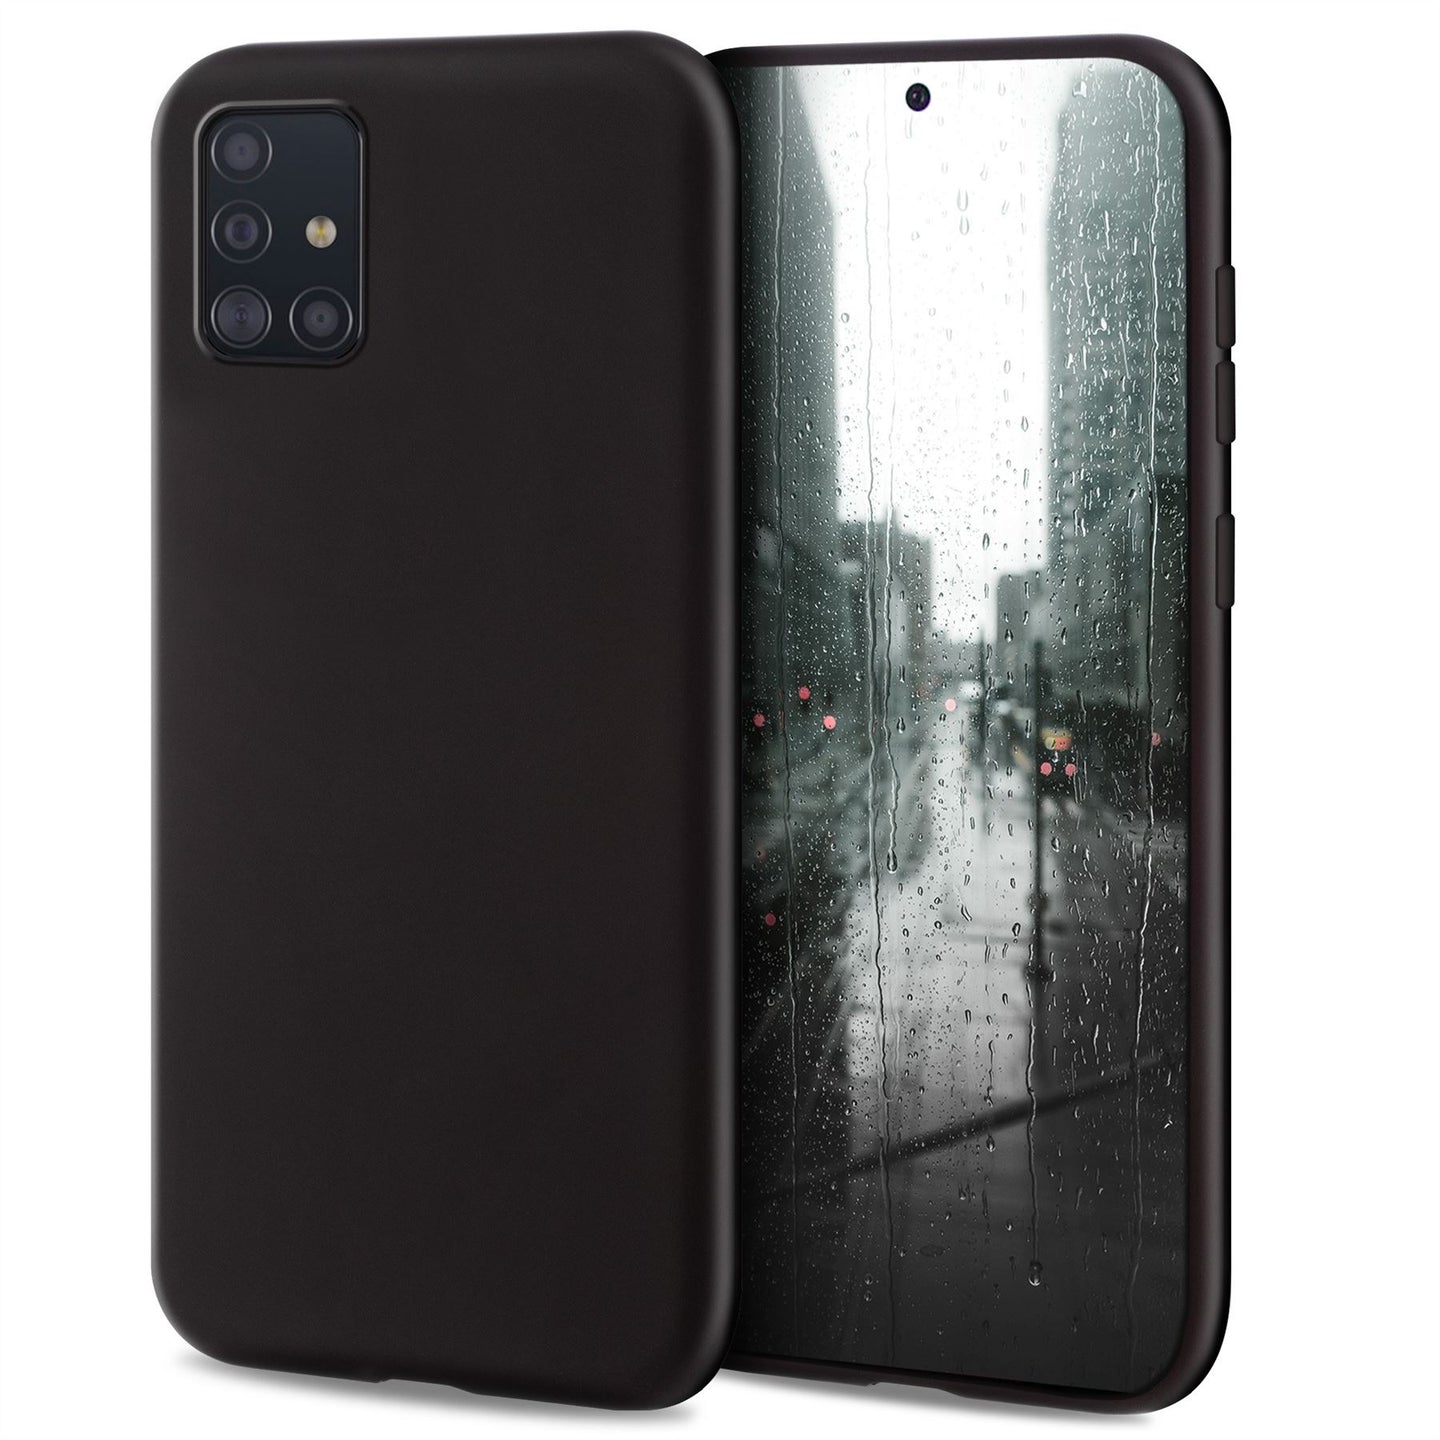 Moozy Lifestyle. Designed for Samsung A51 Case, Black - Liquid Silicone Cover with Matte Finish and Soft Microfiber Lining